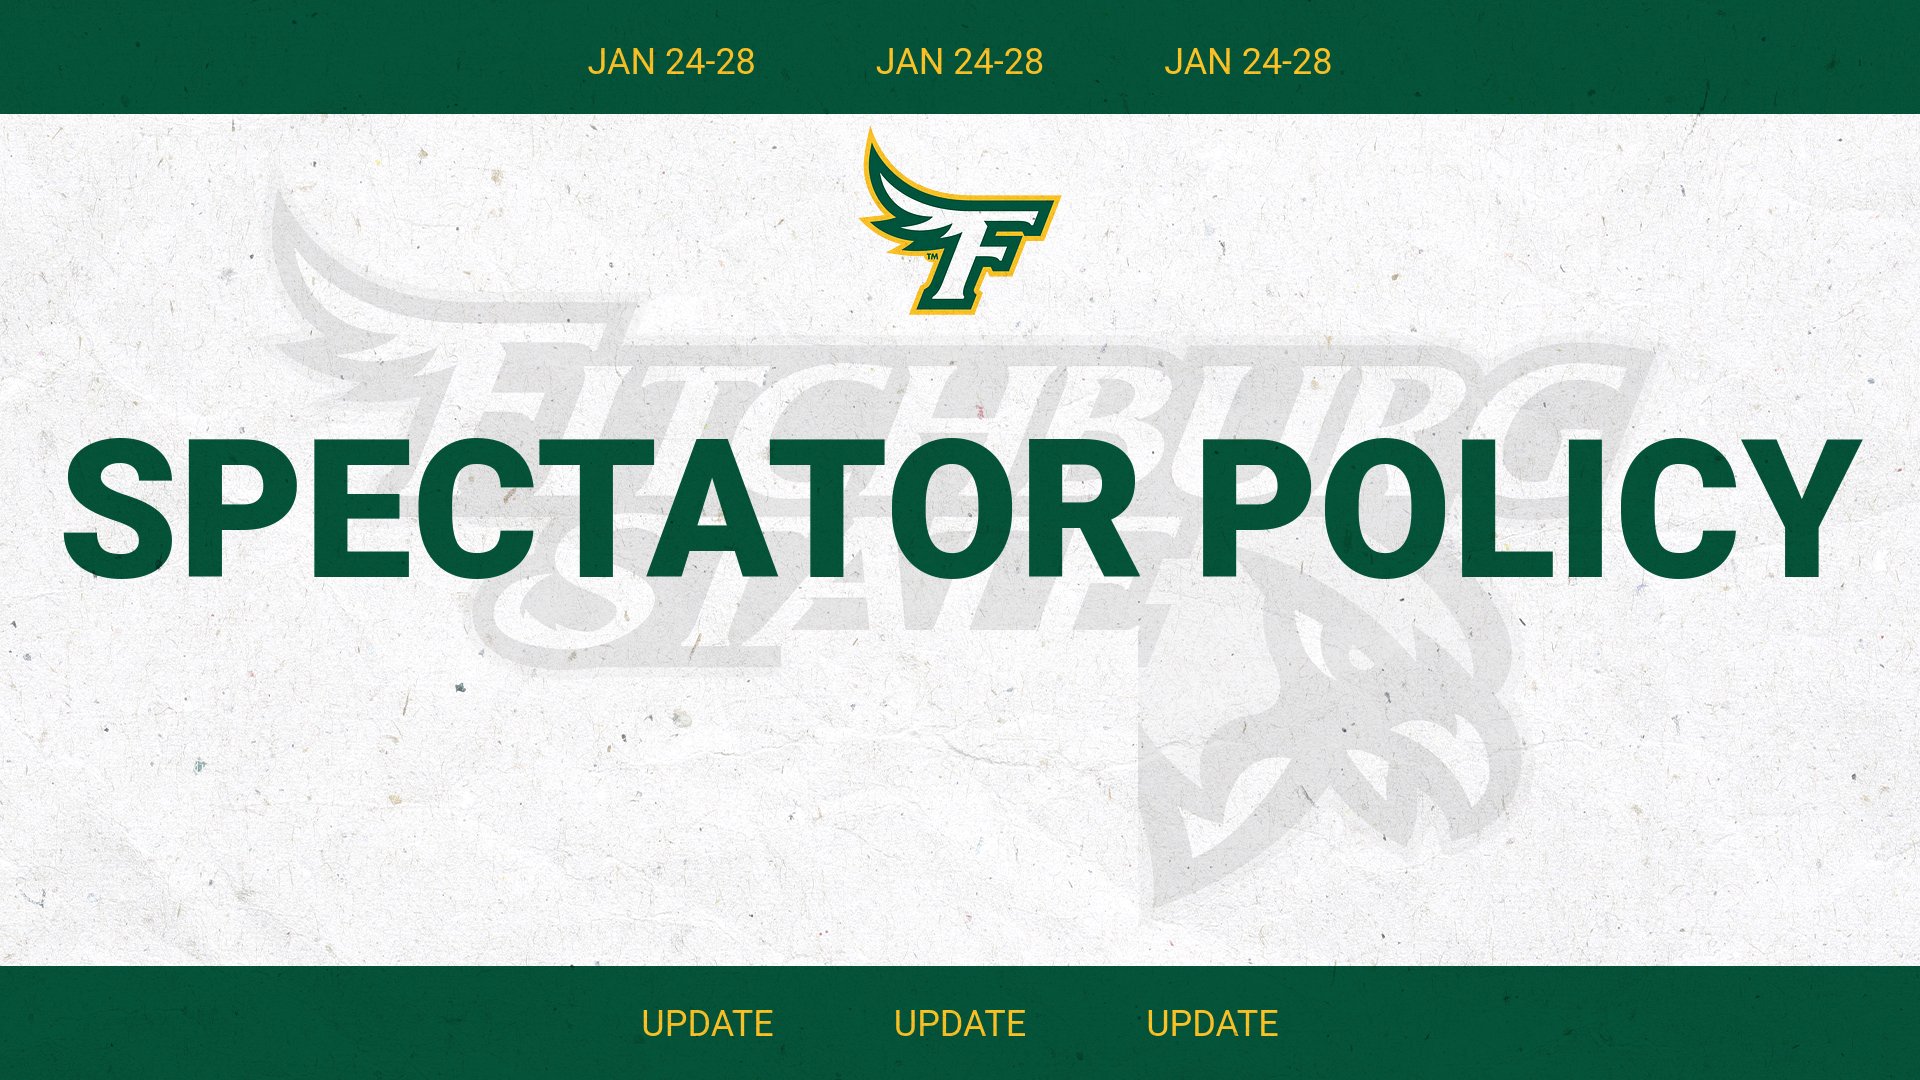 HOME SPECTATOR POLICY - UPDATE JAN 24-28